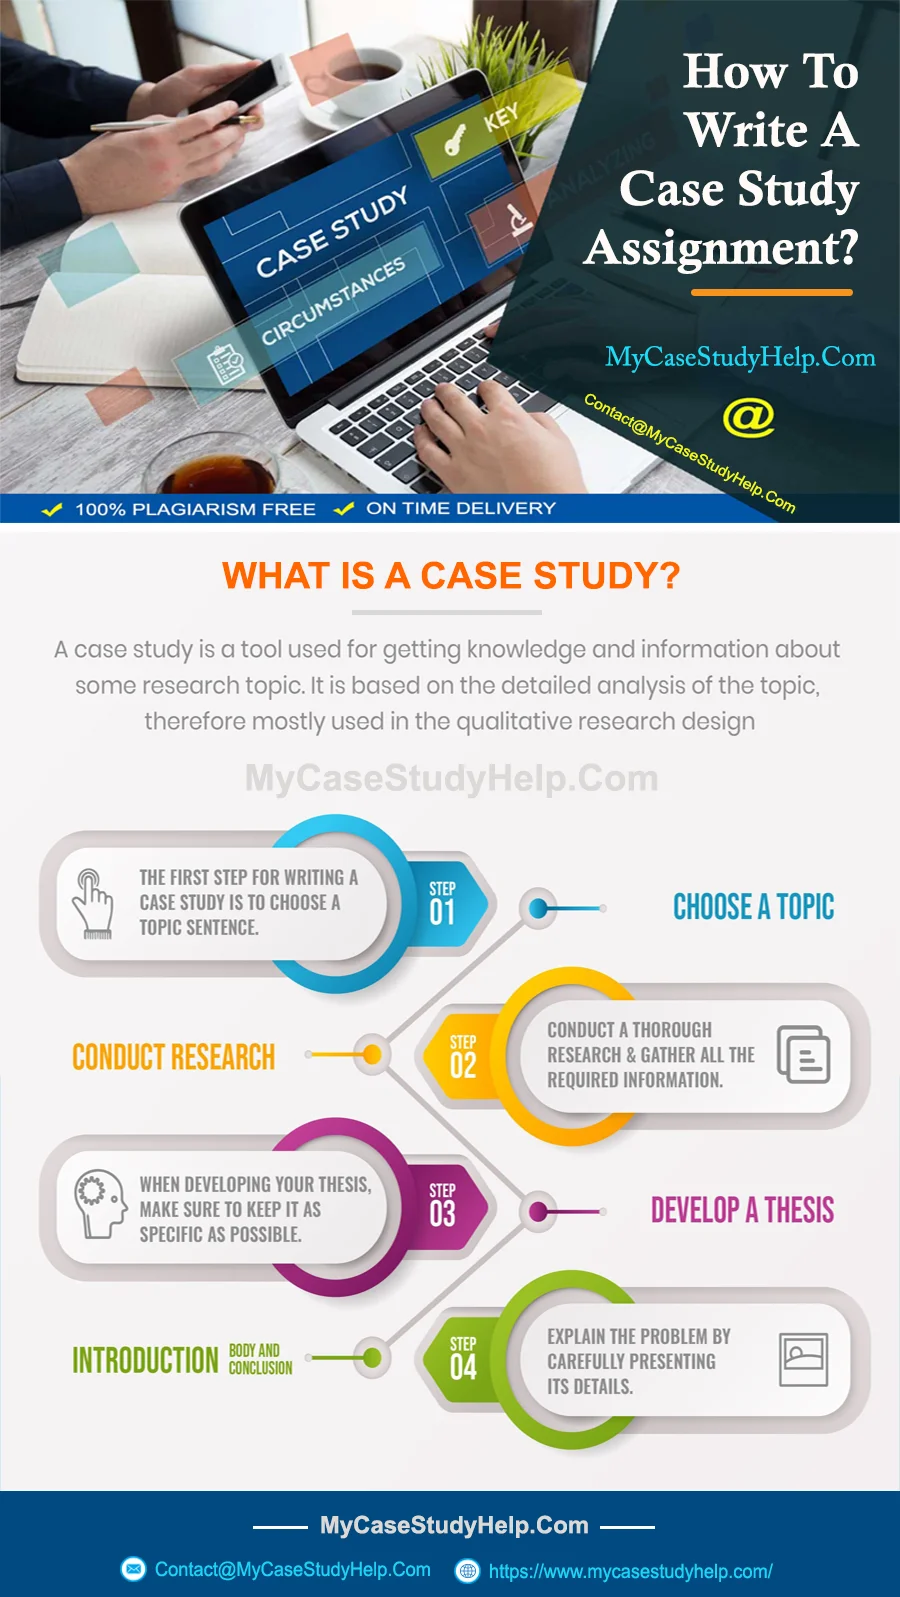 How To Write A Case Study Assignment